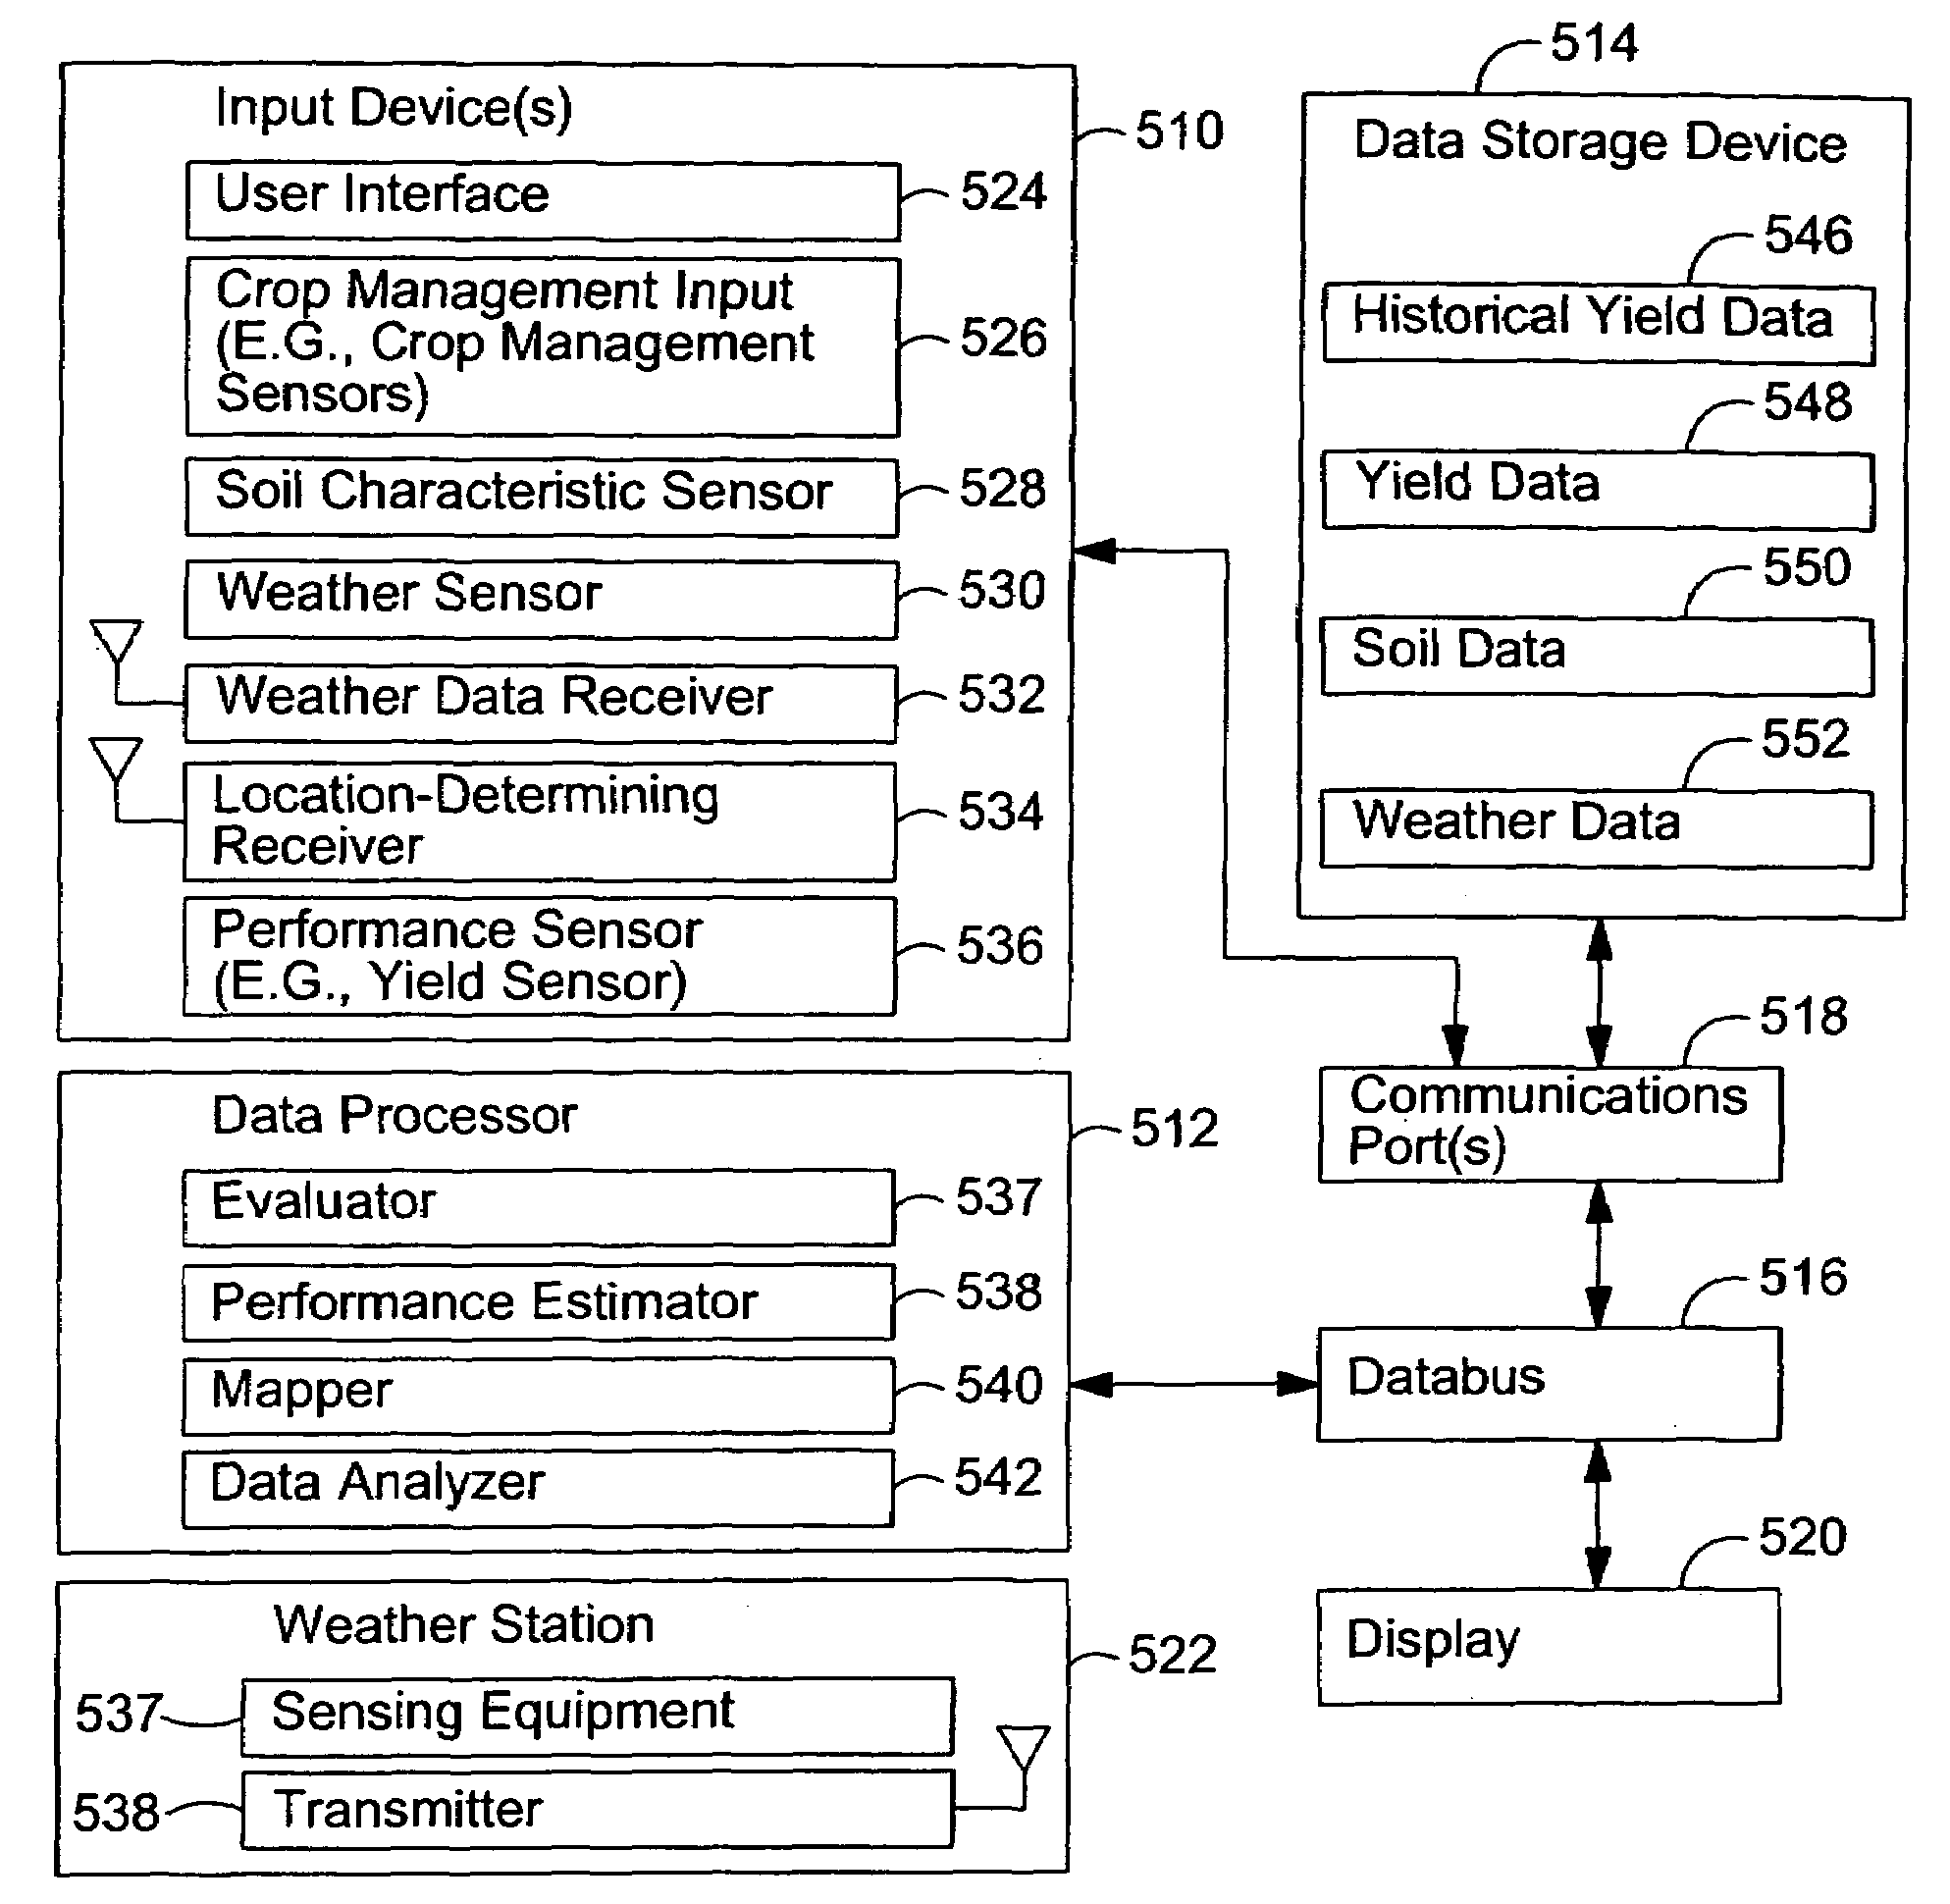 Method and system of evaluating performance of a crop